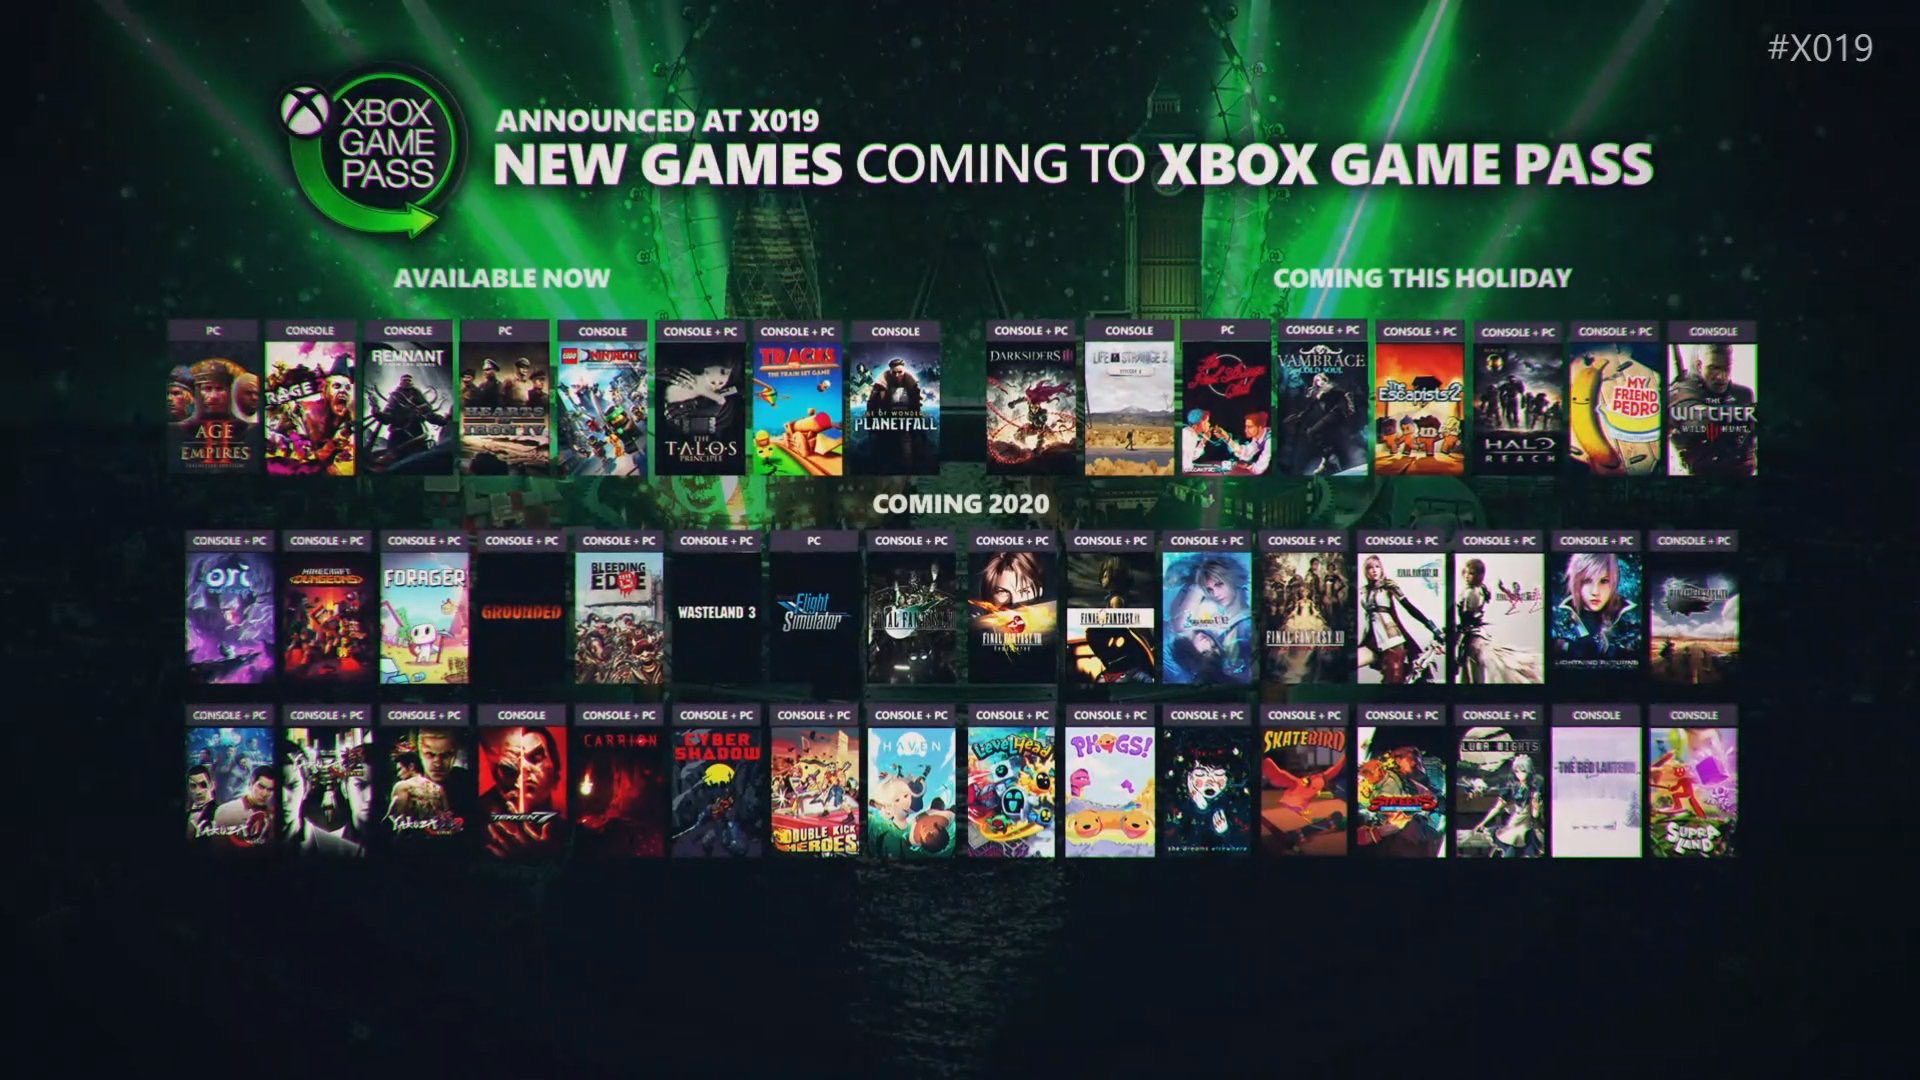 xbox game pass 2$ deal showing up as 10